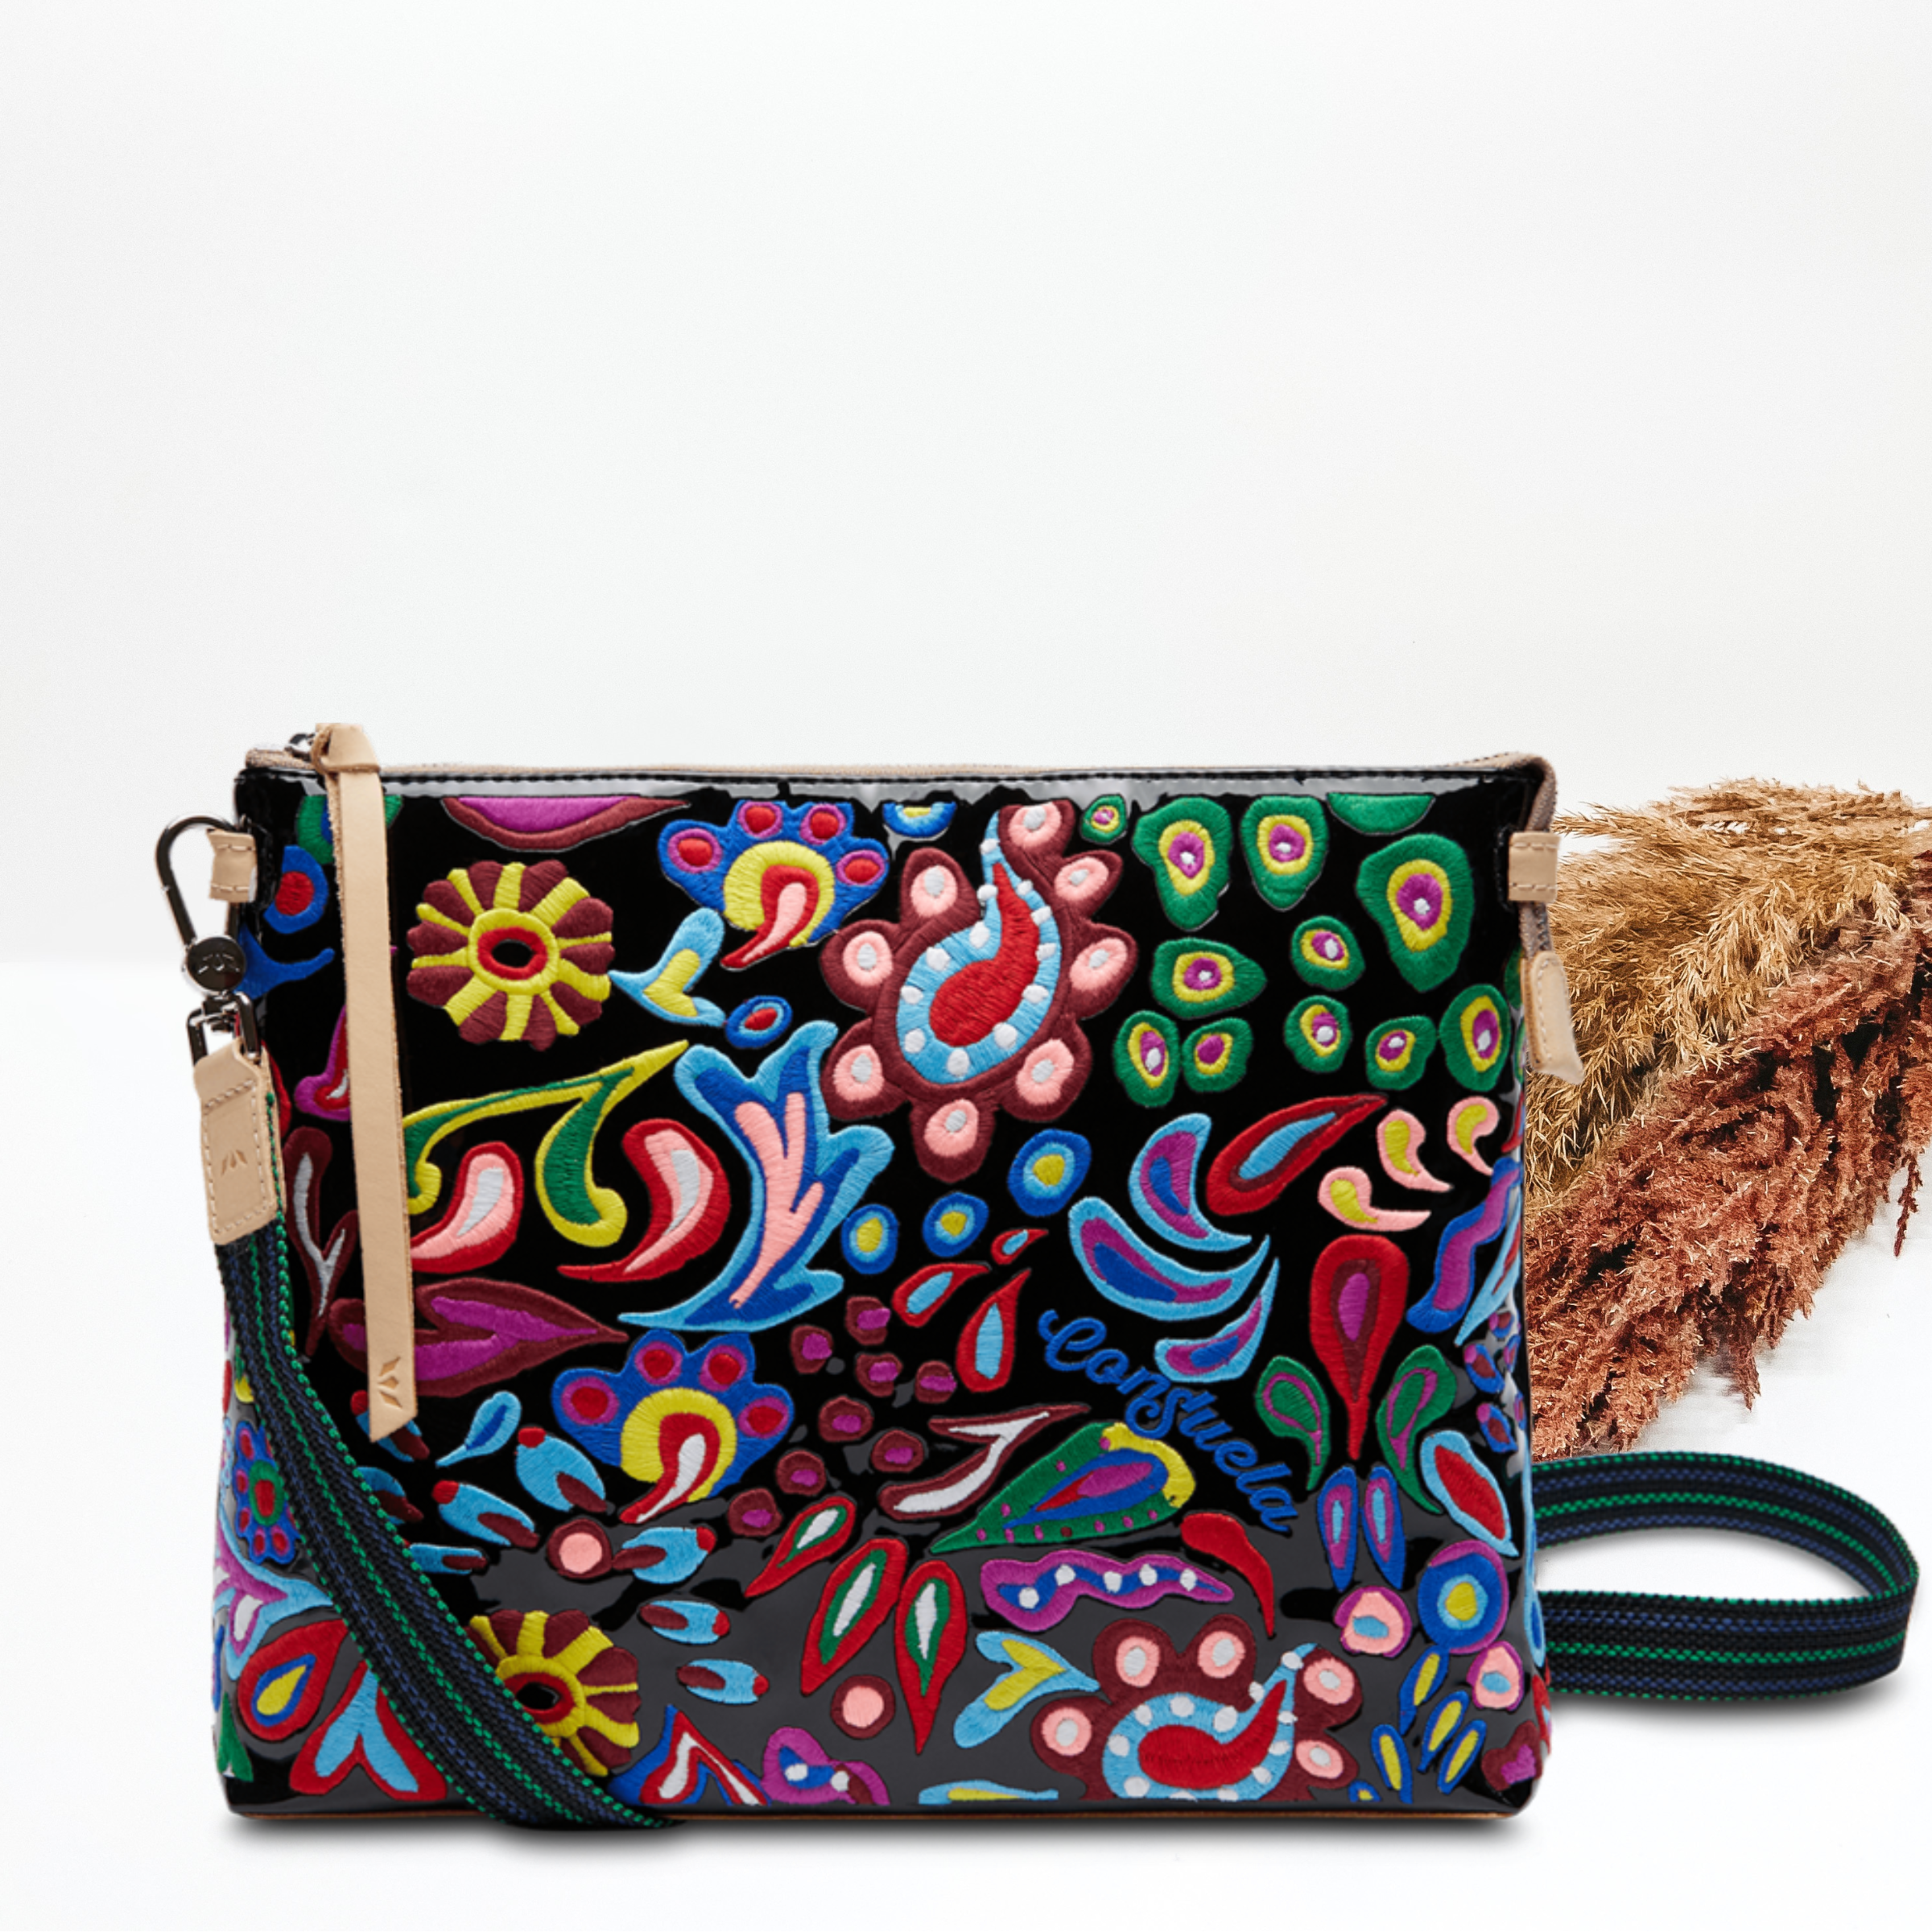 Black rectangle purse with a multicolored embroidered design. This bag also has tan leather detailing and a striped purse strap. This purse is pictured on a white background with tan and brown pompous grass in the background.